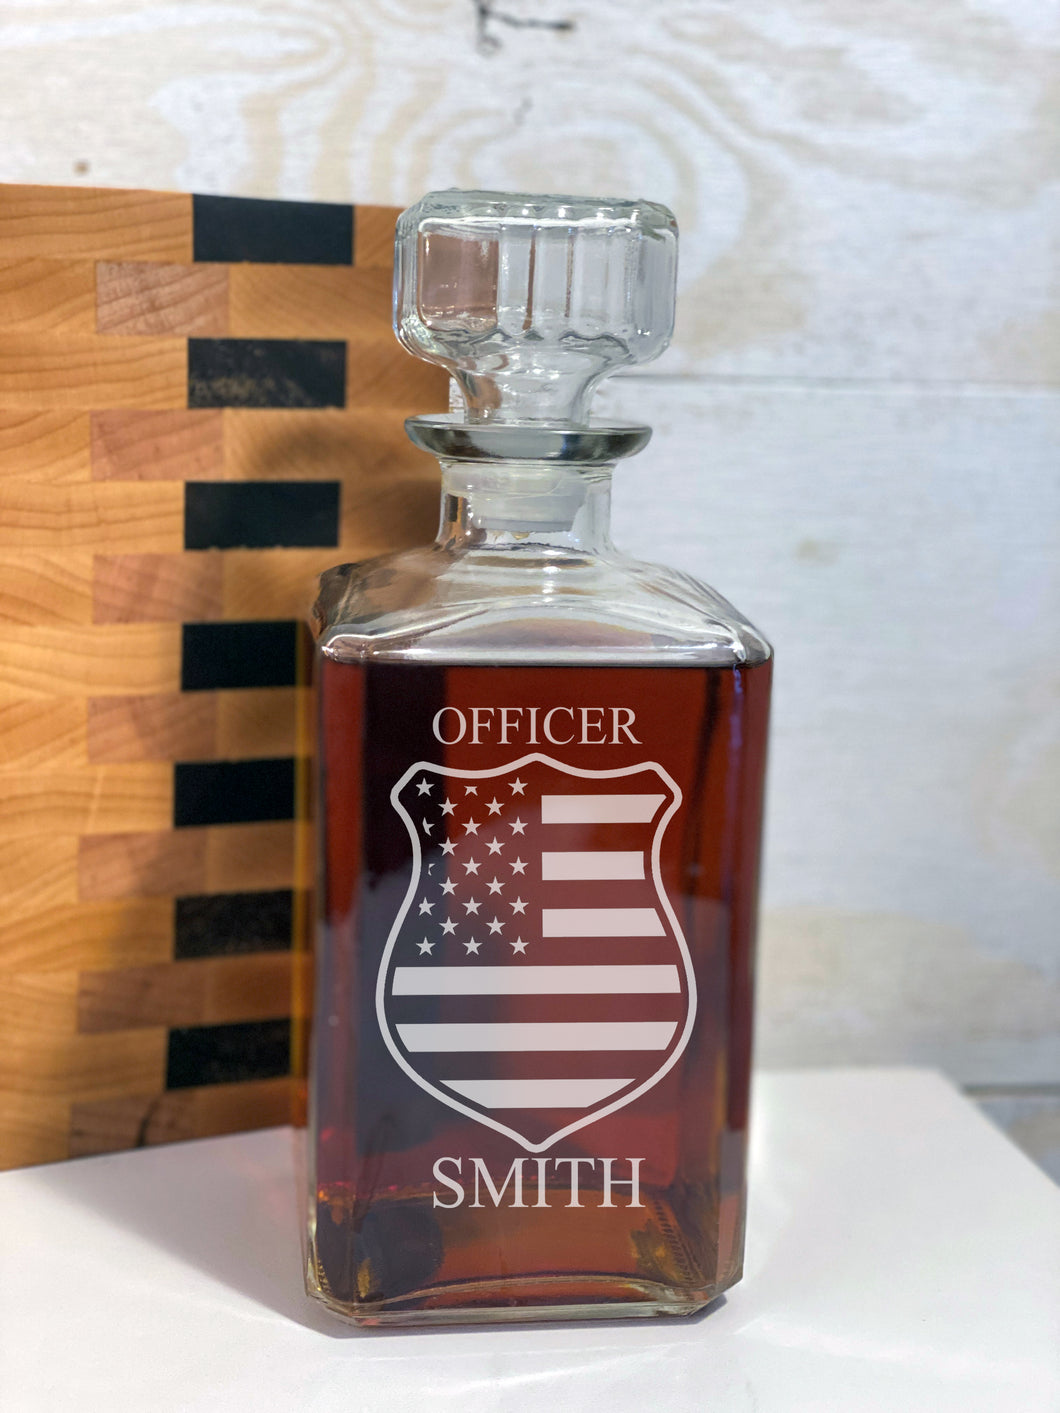 Police Personalized Engraved Liquor Decanter